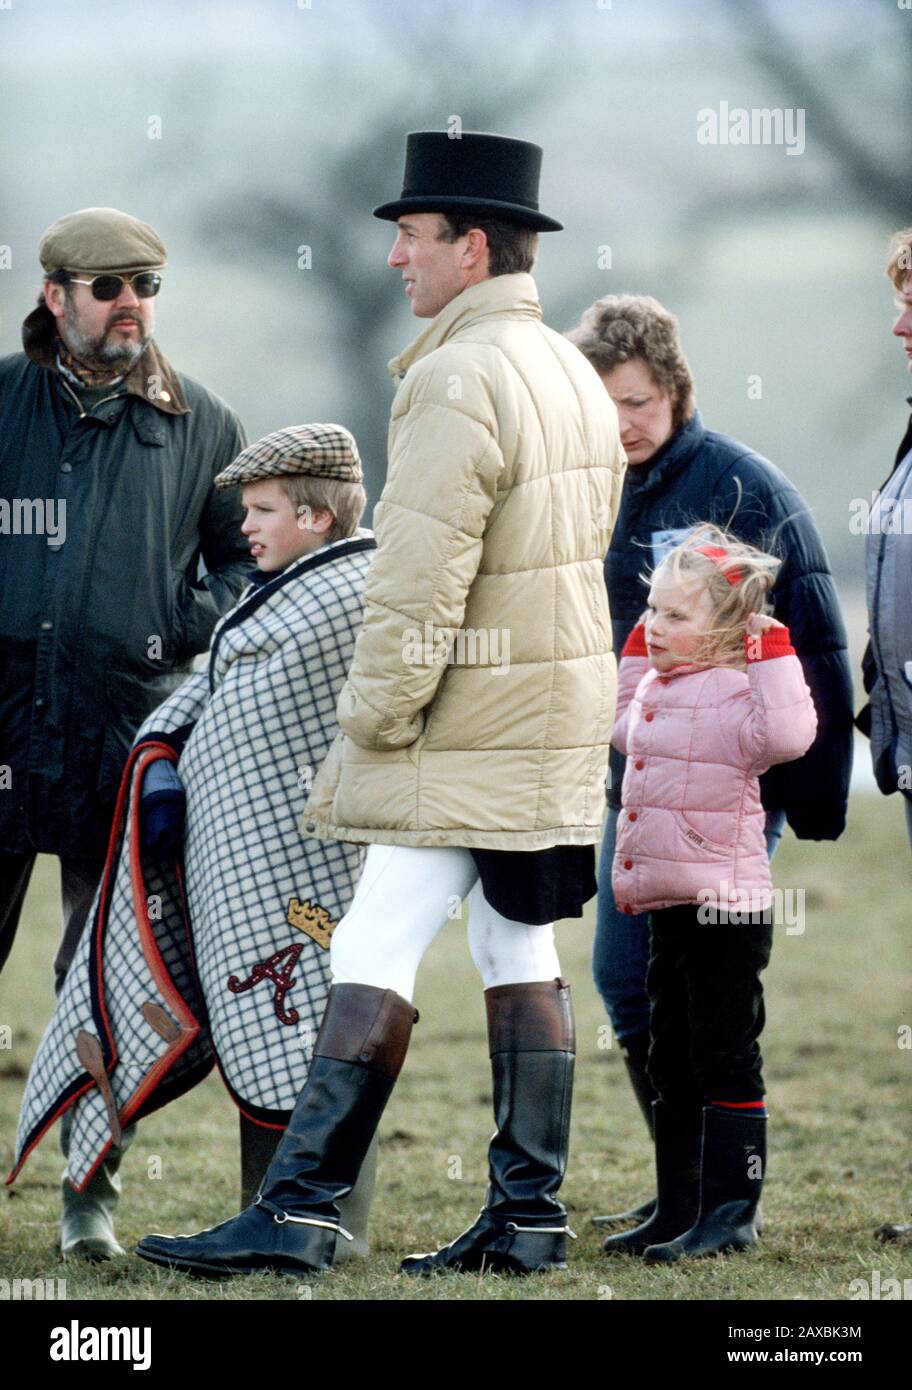 LtoR Peter Phillips, Mark Phillips and Zara Phillips at the Brigstock Horse Trials, England March 1987 Stock Photo